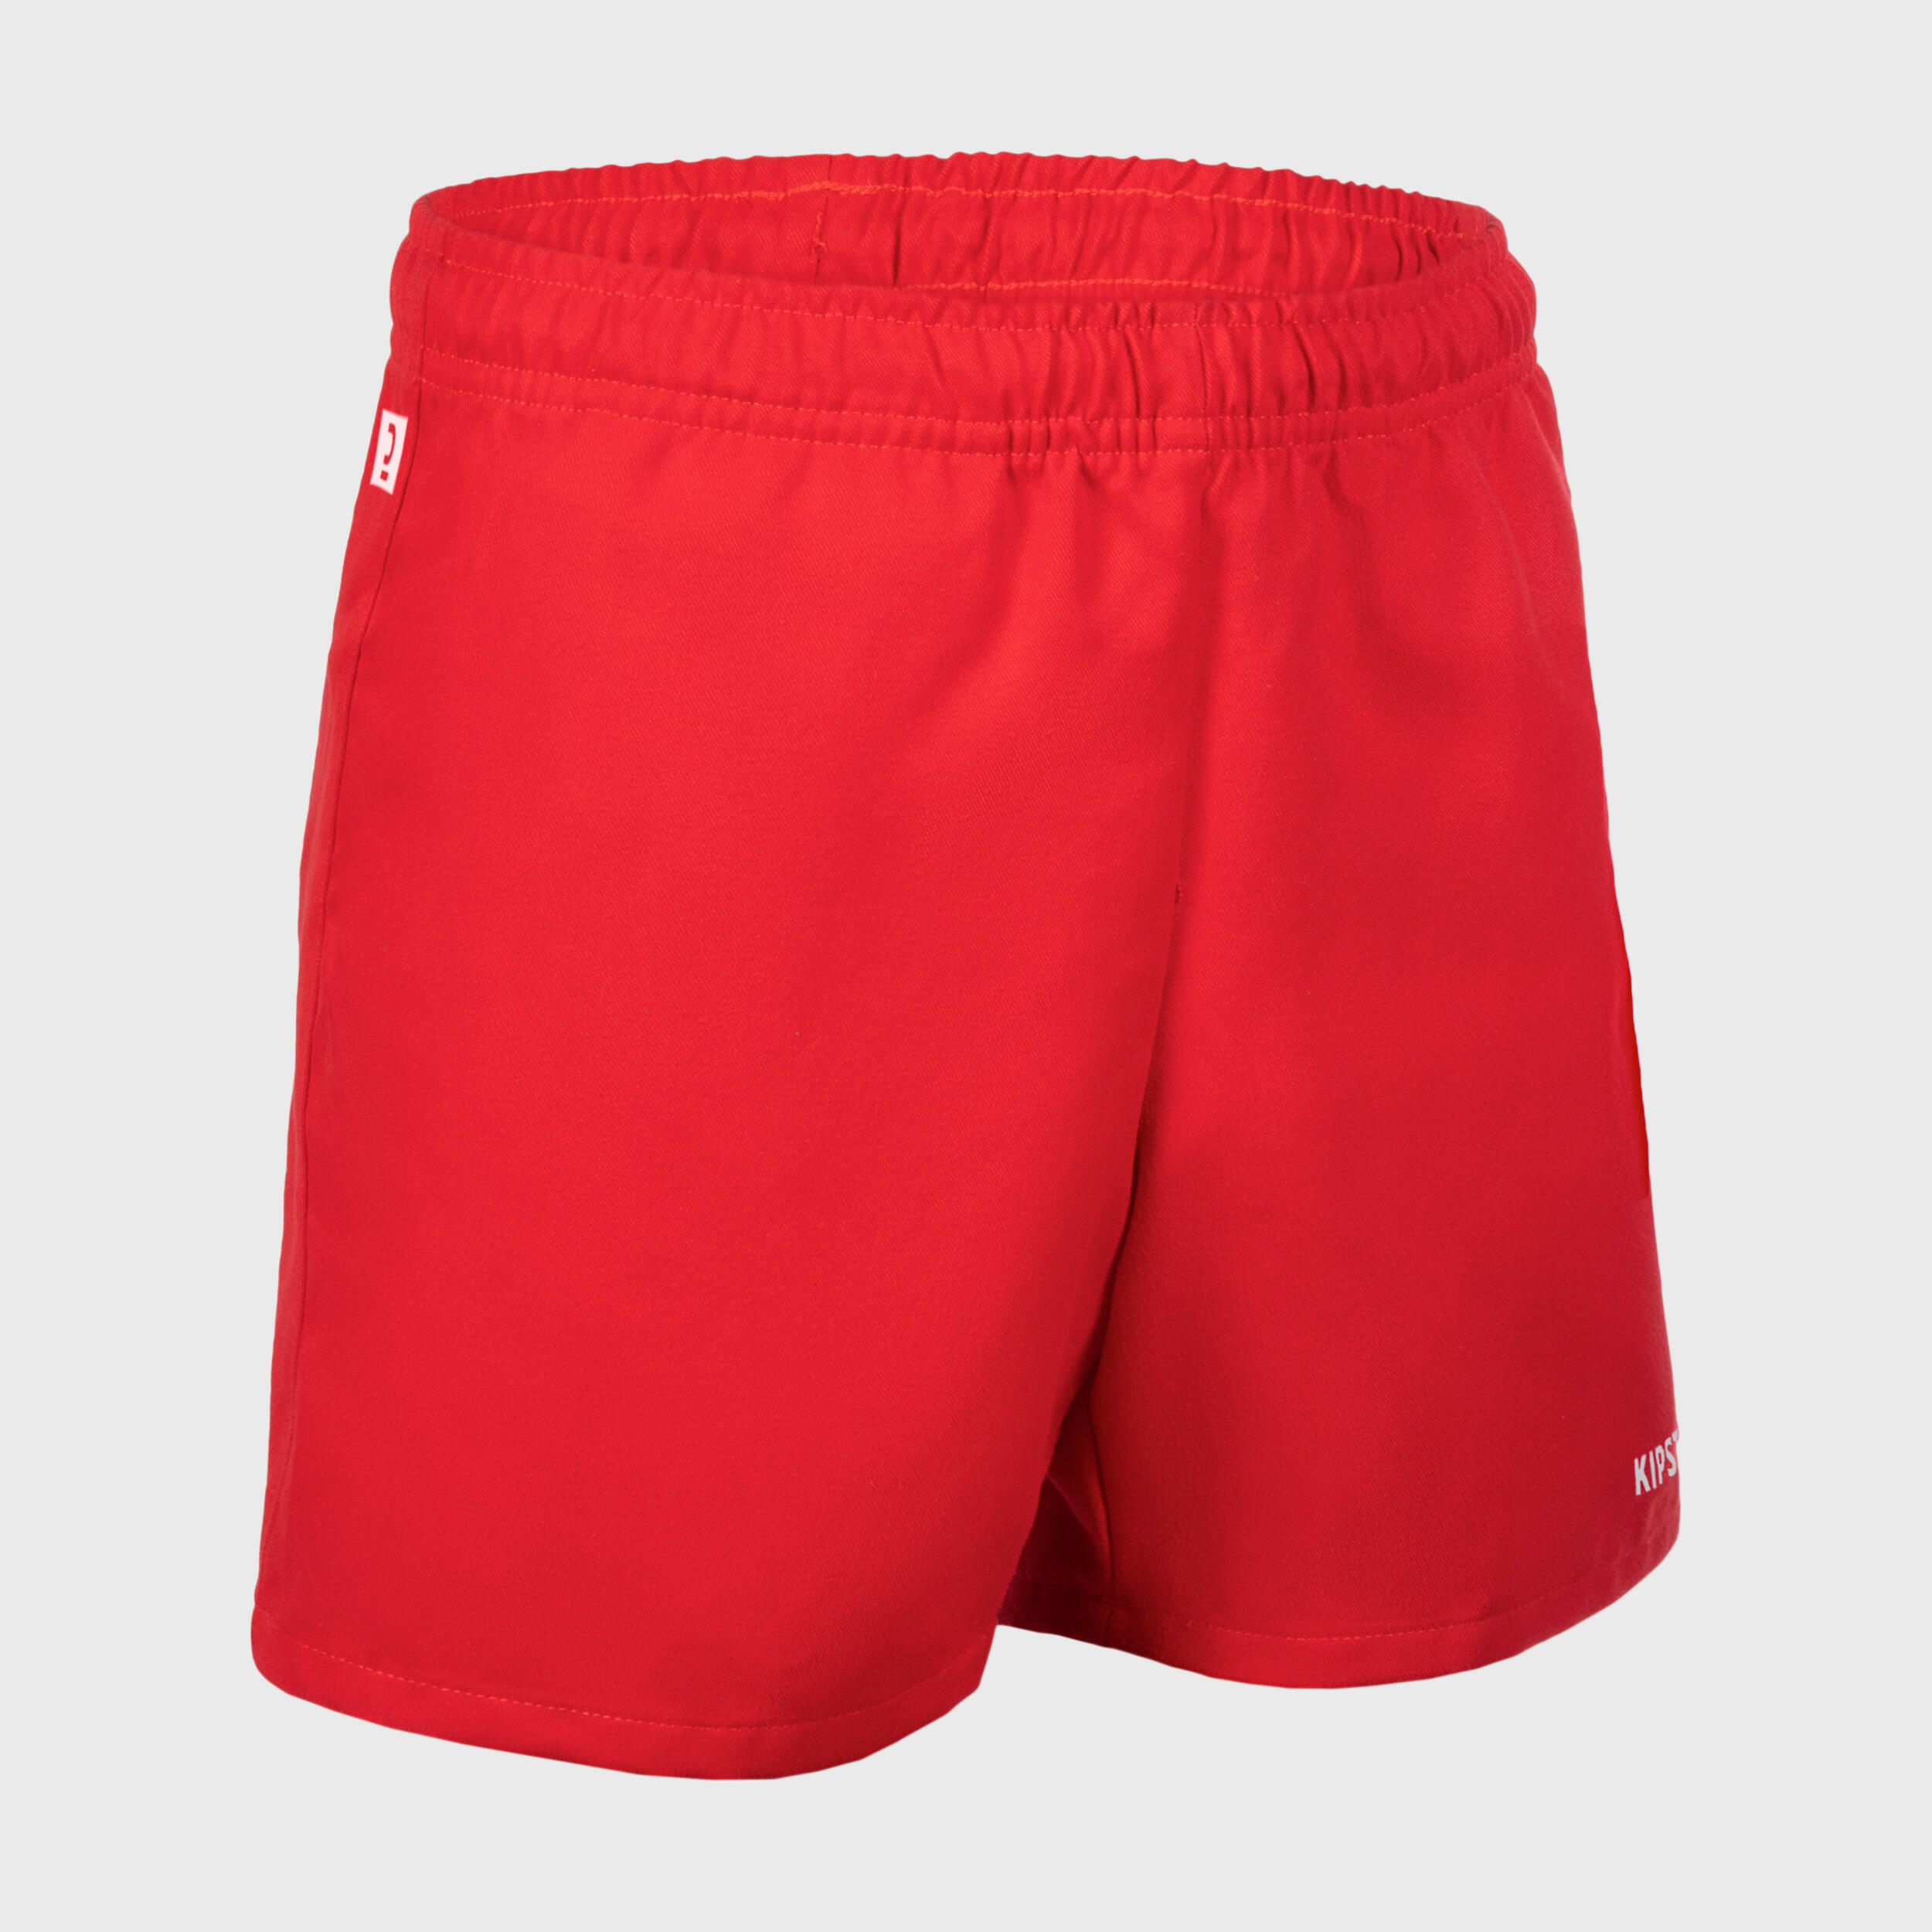 Decathlon | Short rugby adulto R100 rossi |  Offload